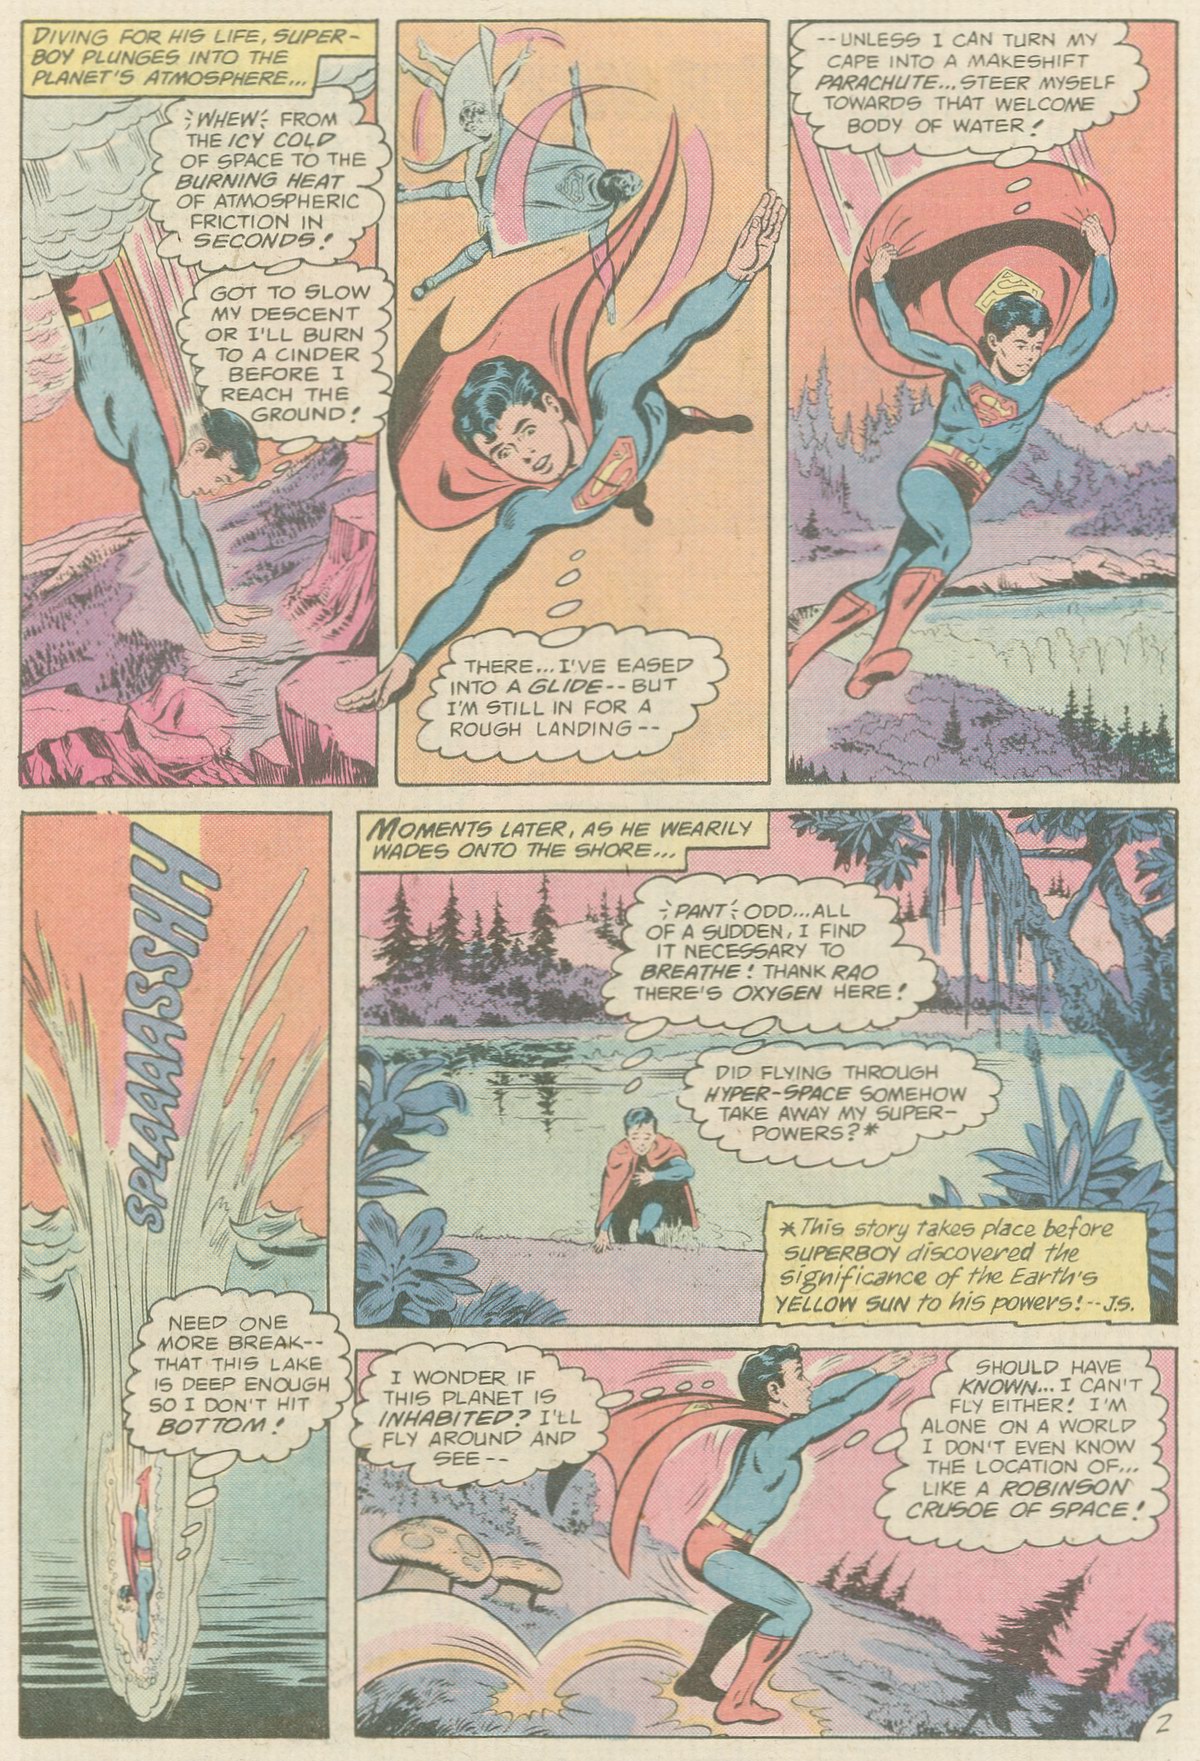 The New Adventures of Superboy 20 Page 19